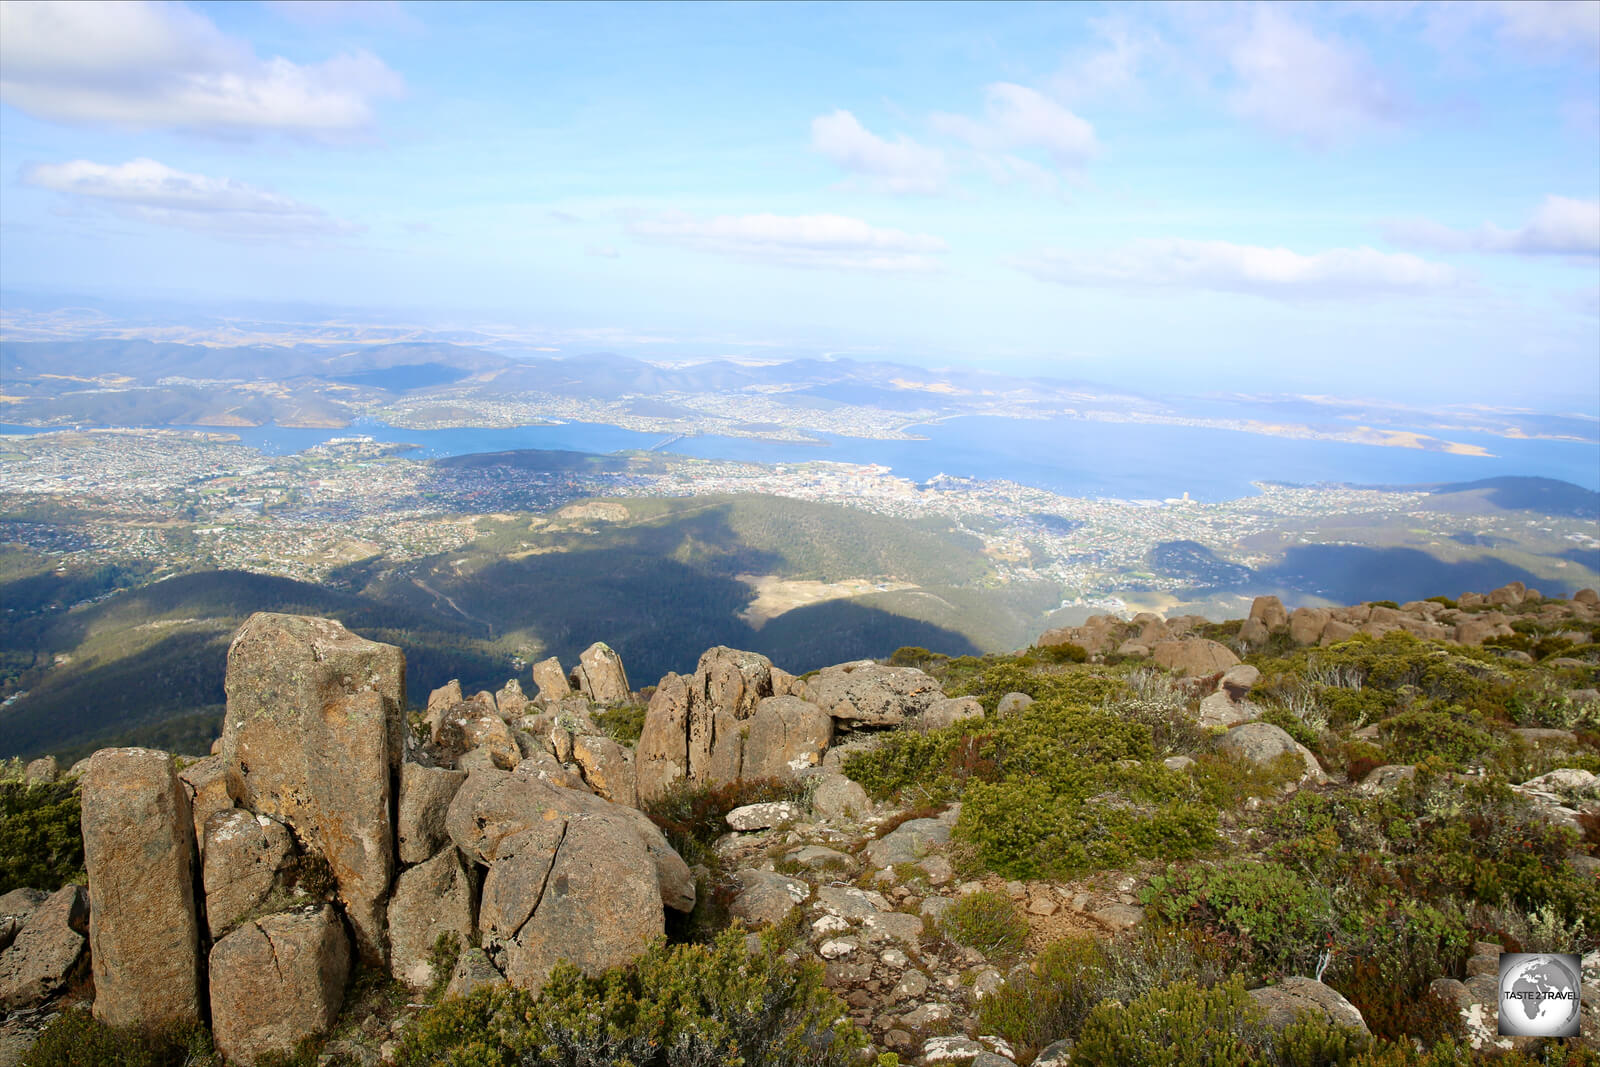 A view of Hobart from Mount Wellington, Tasmania